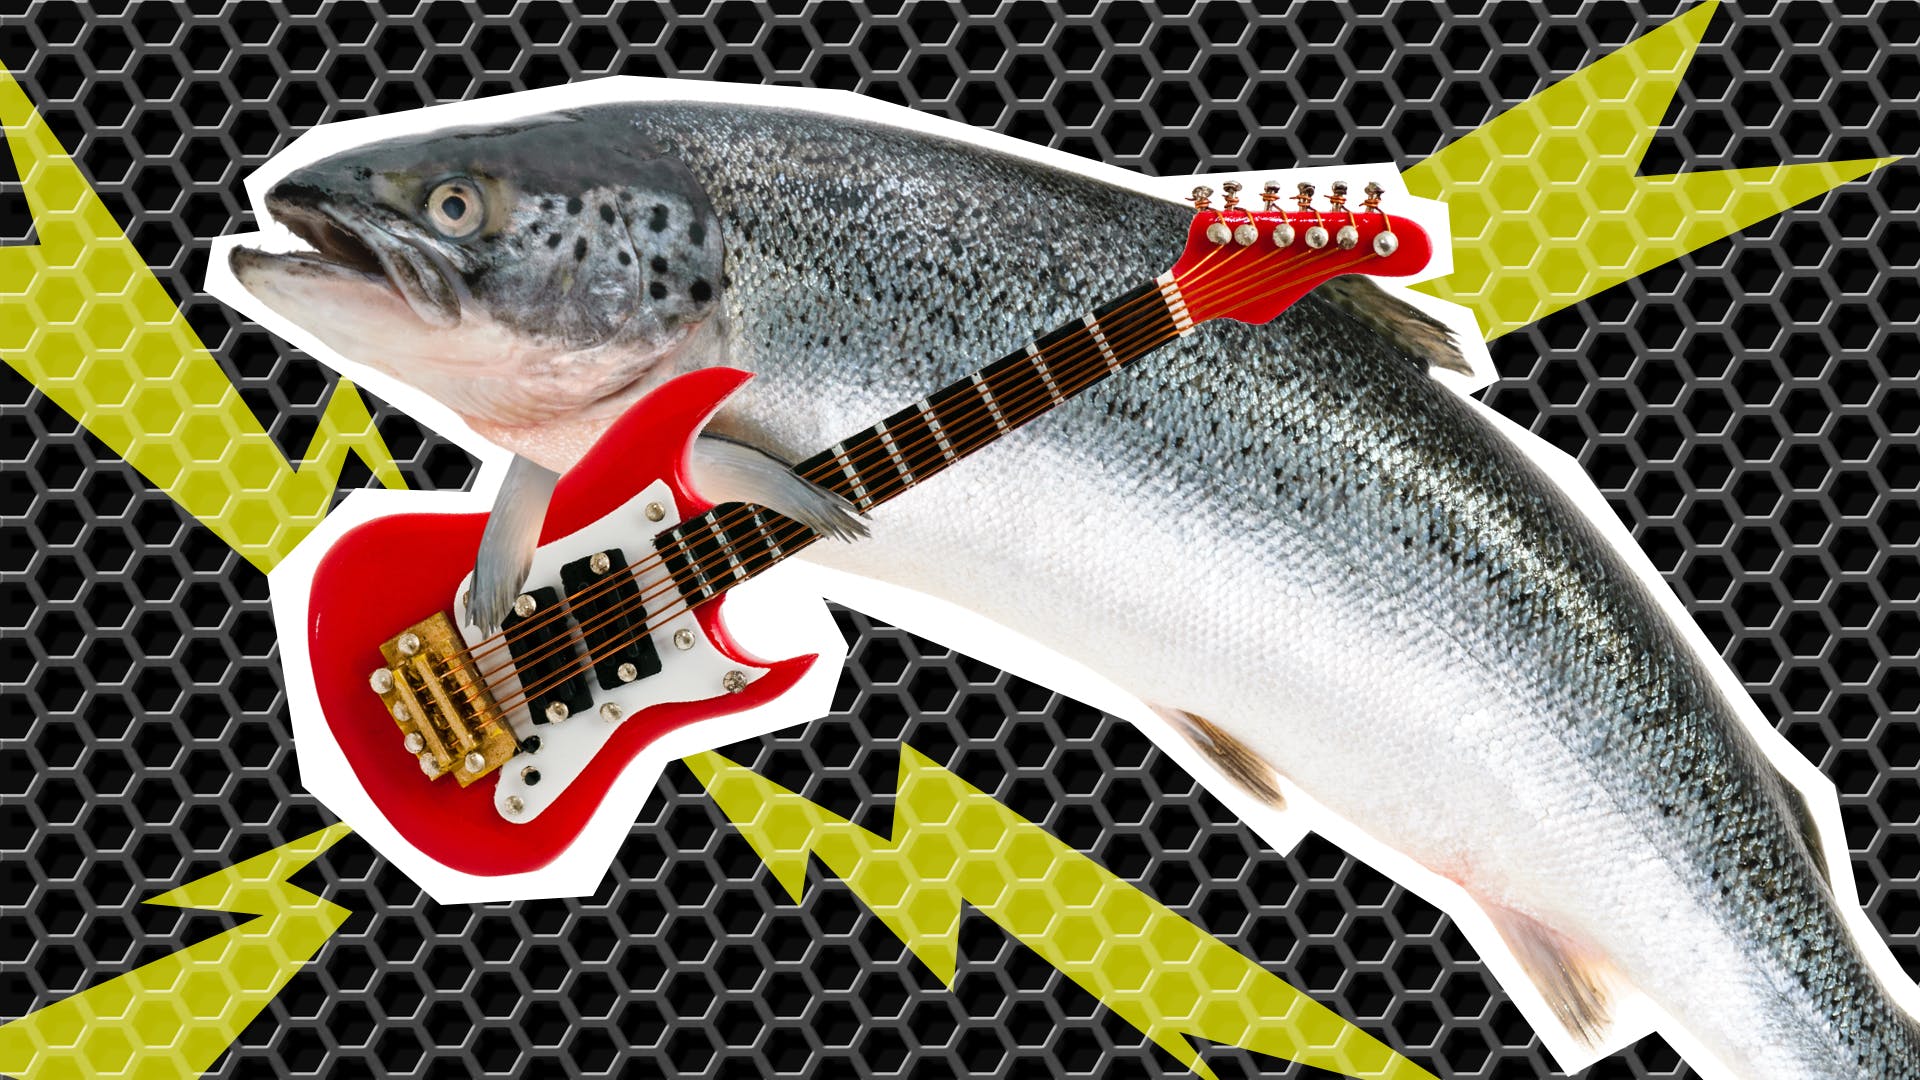 A fish playing a guitar. What's the difference between a guitar and a fish? | What's The Difference Between A Guitar And A Fish?